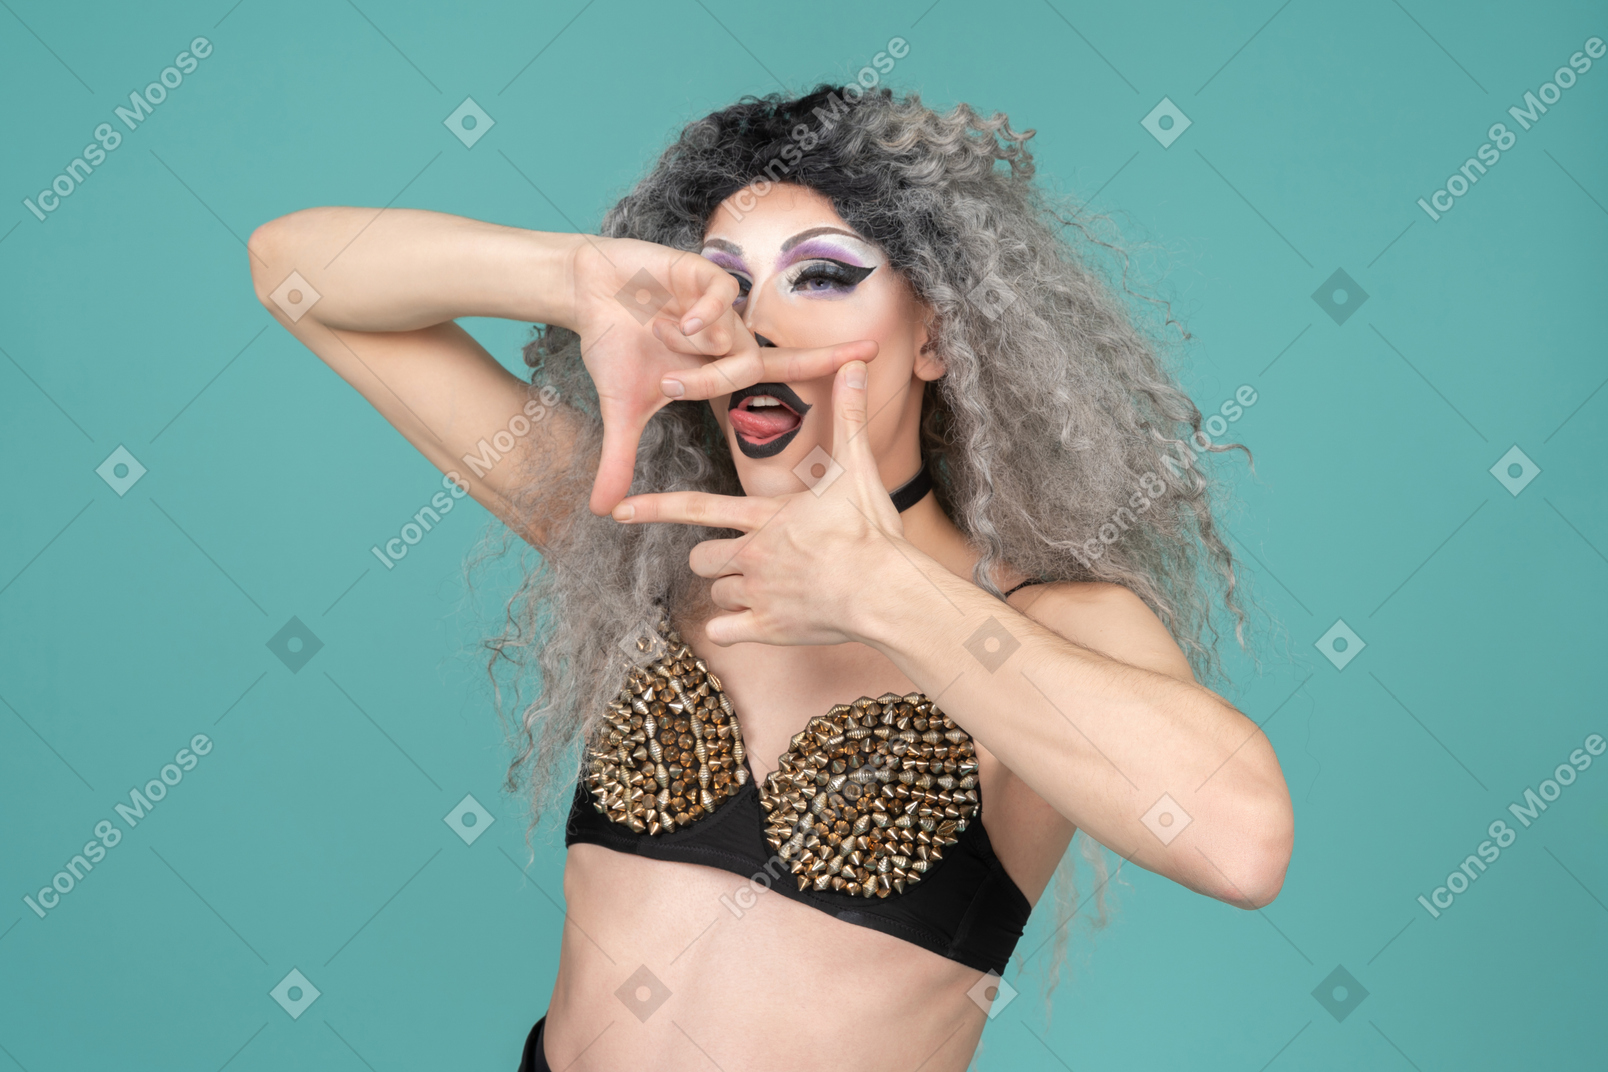 Drag queen finger framing their mouth and sticking out tongue